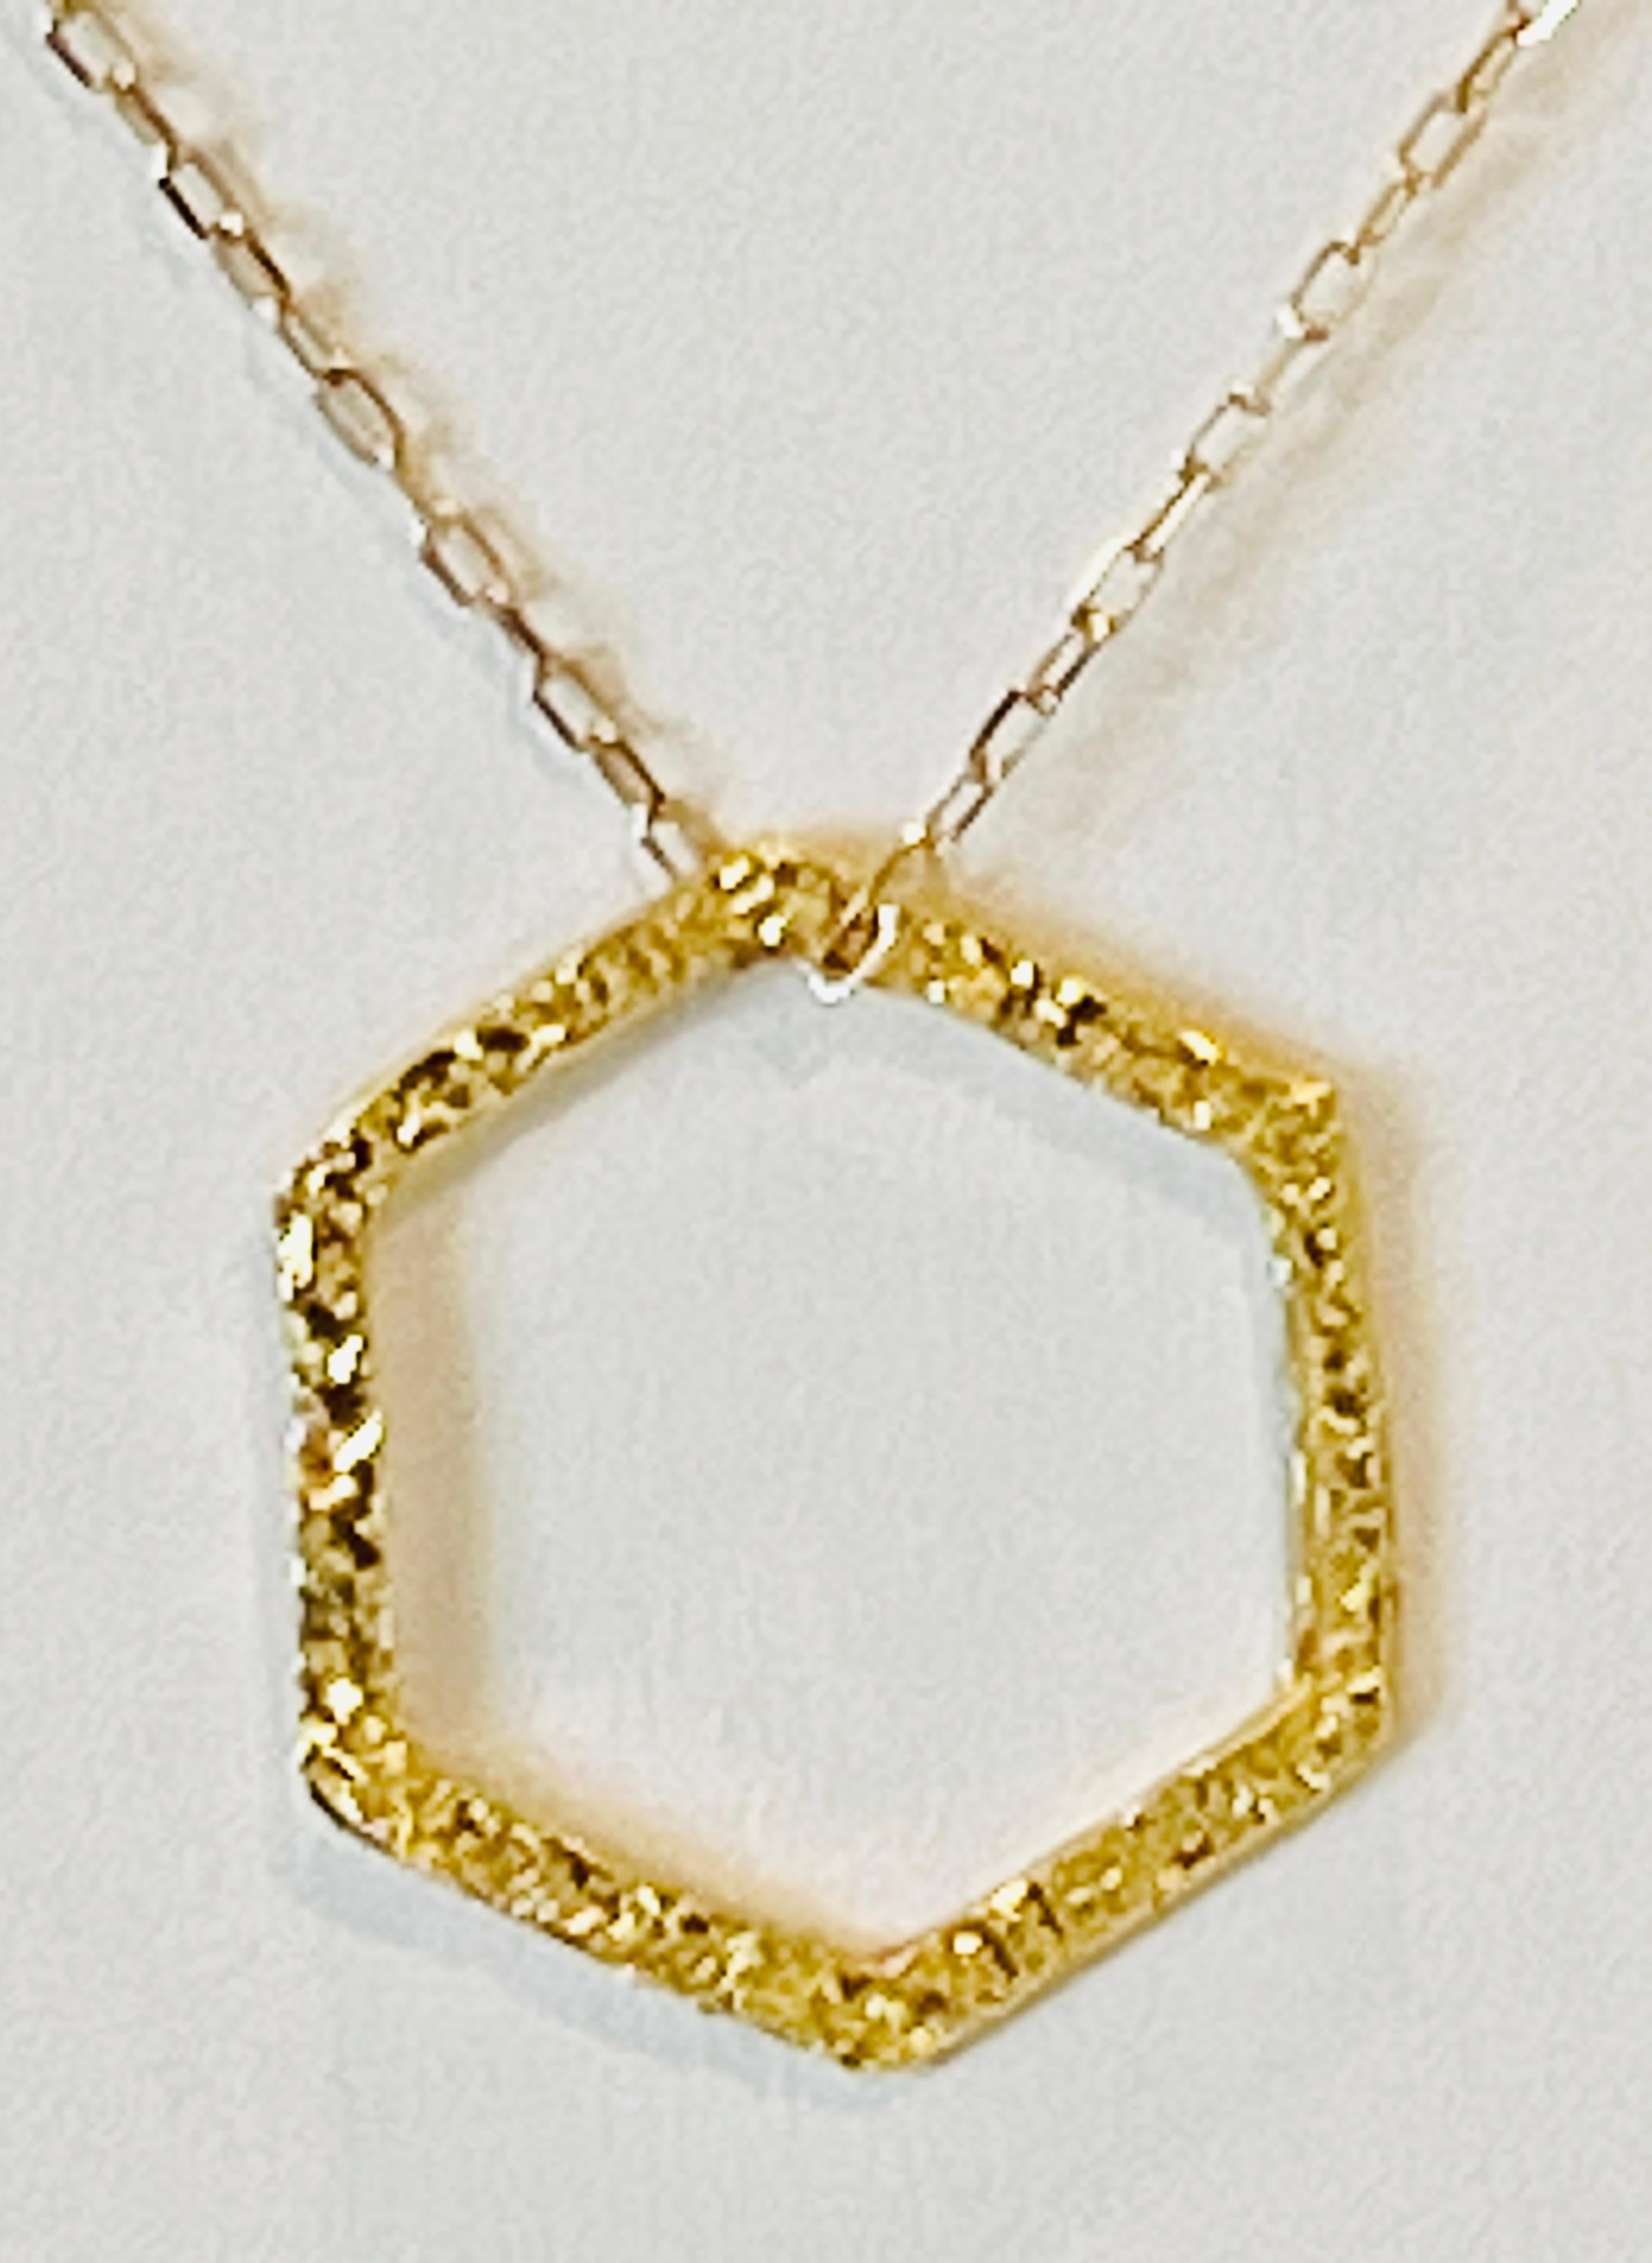 Women's or Men's 22k Gold Hexagon Necklace, by Tagili For Sale